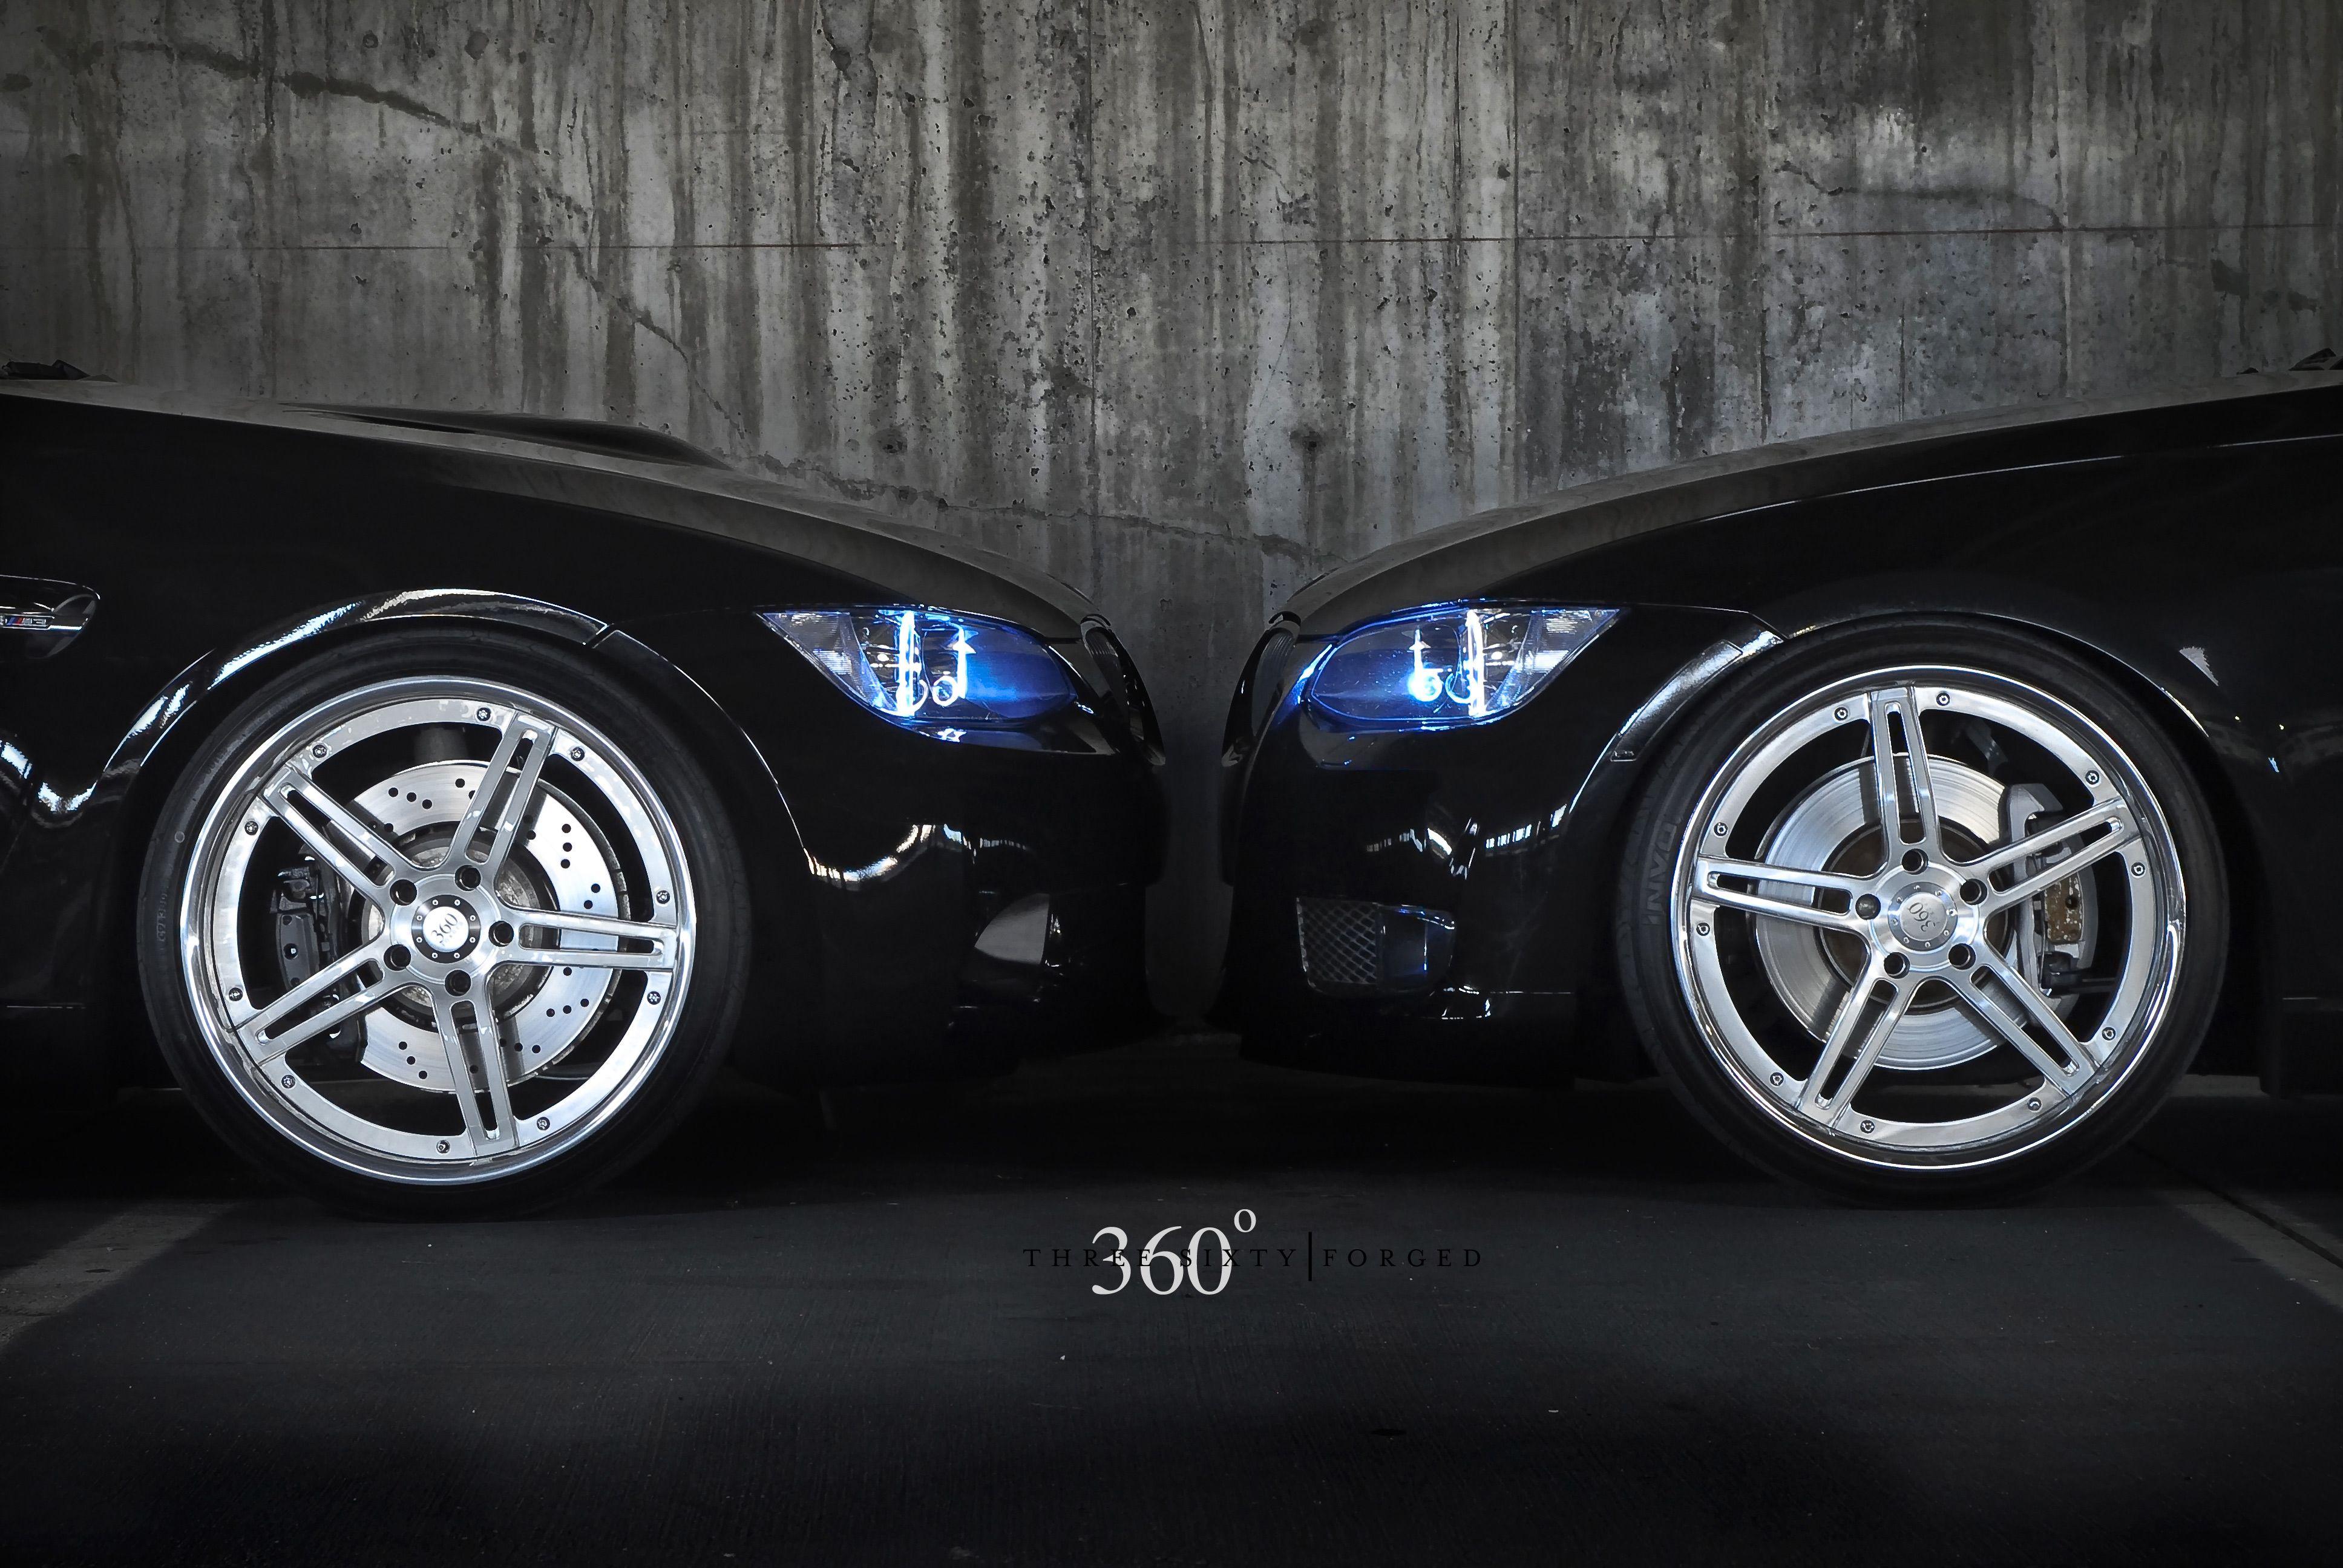 360 forged. BMW m3 360 Forged. BMW m3 e92 360 Forged. БМВ 360 92. БМВ vs Мерседес.